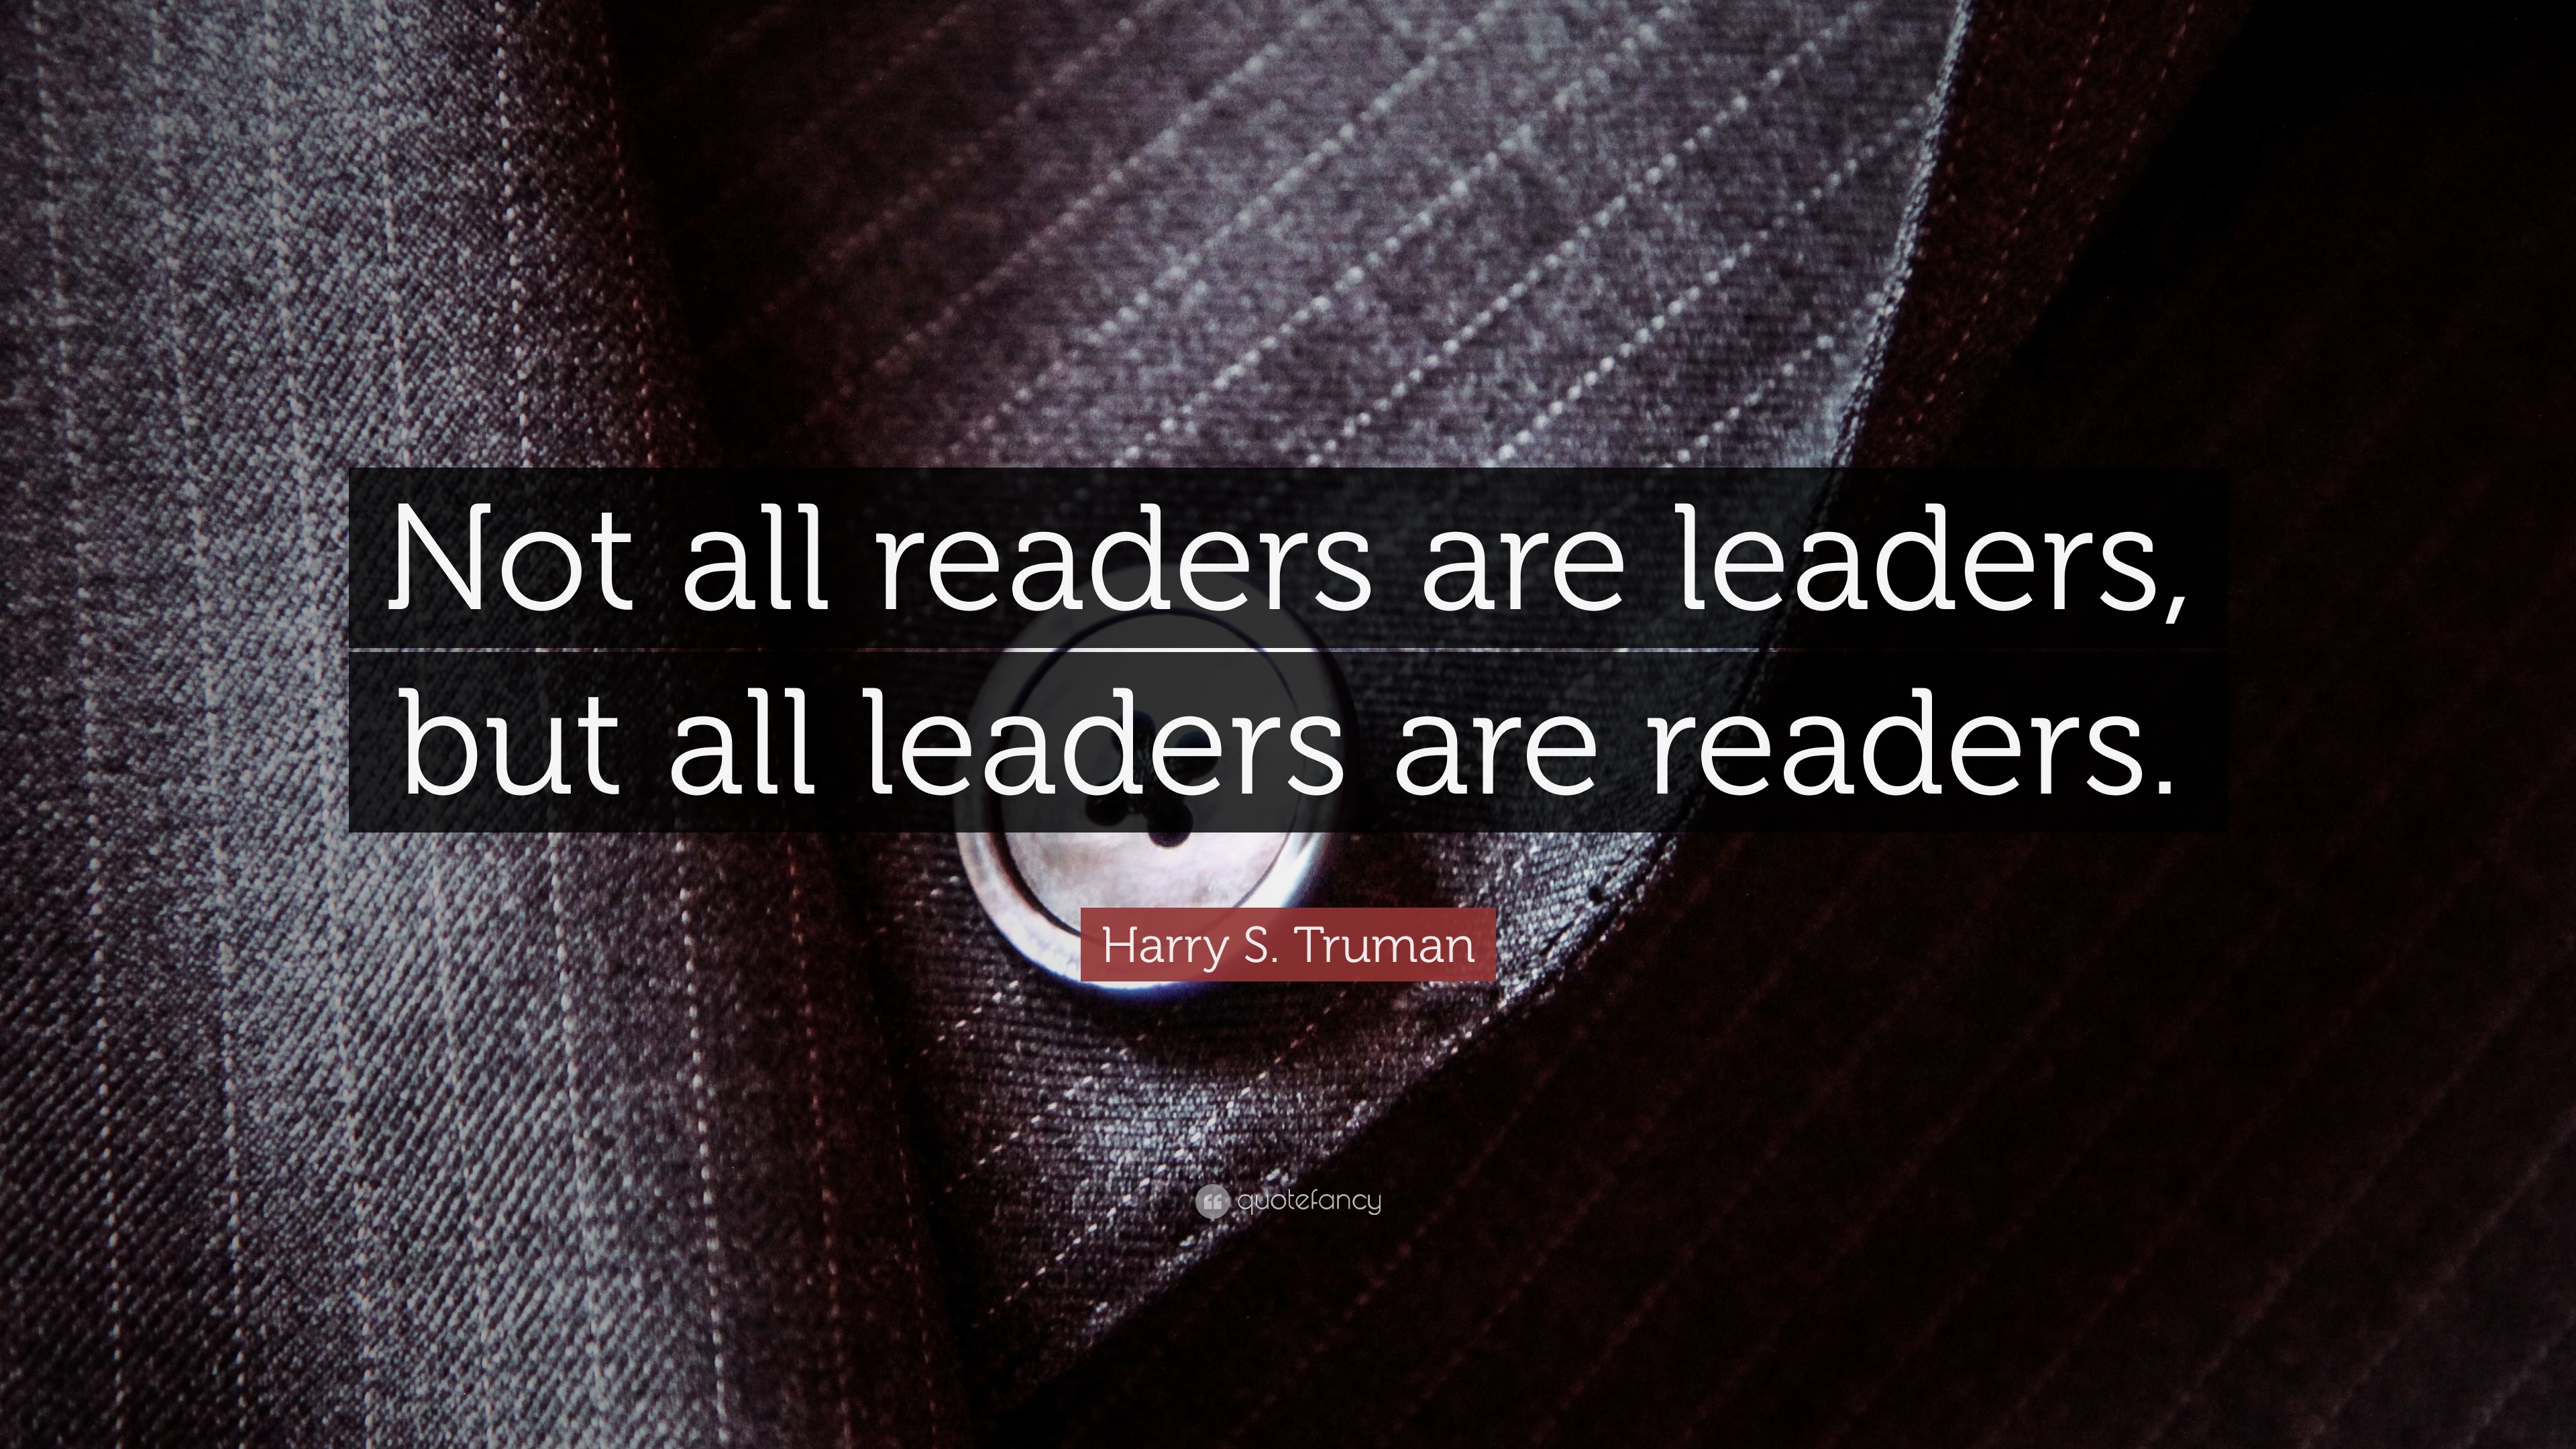 Harry S. Truman Quote: “Not all readers are leaders, but all